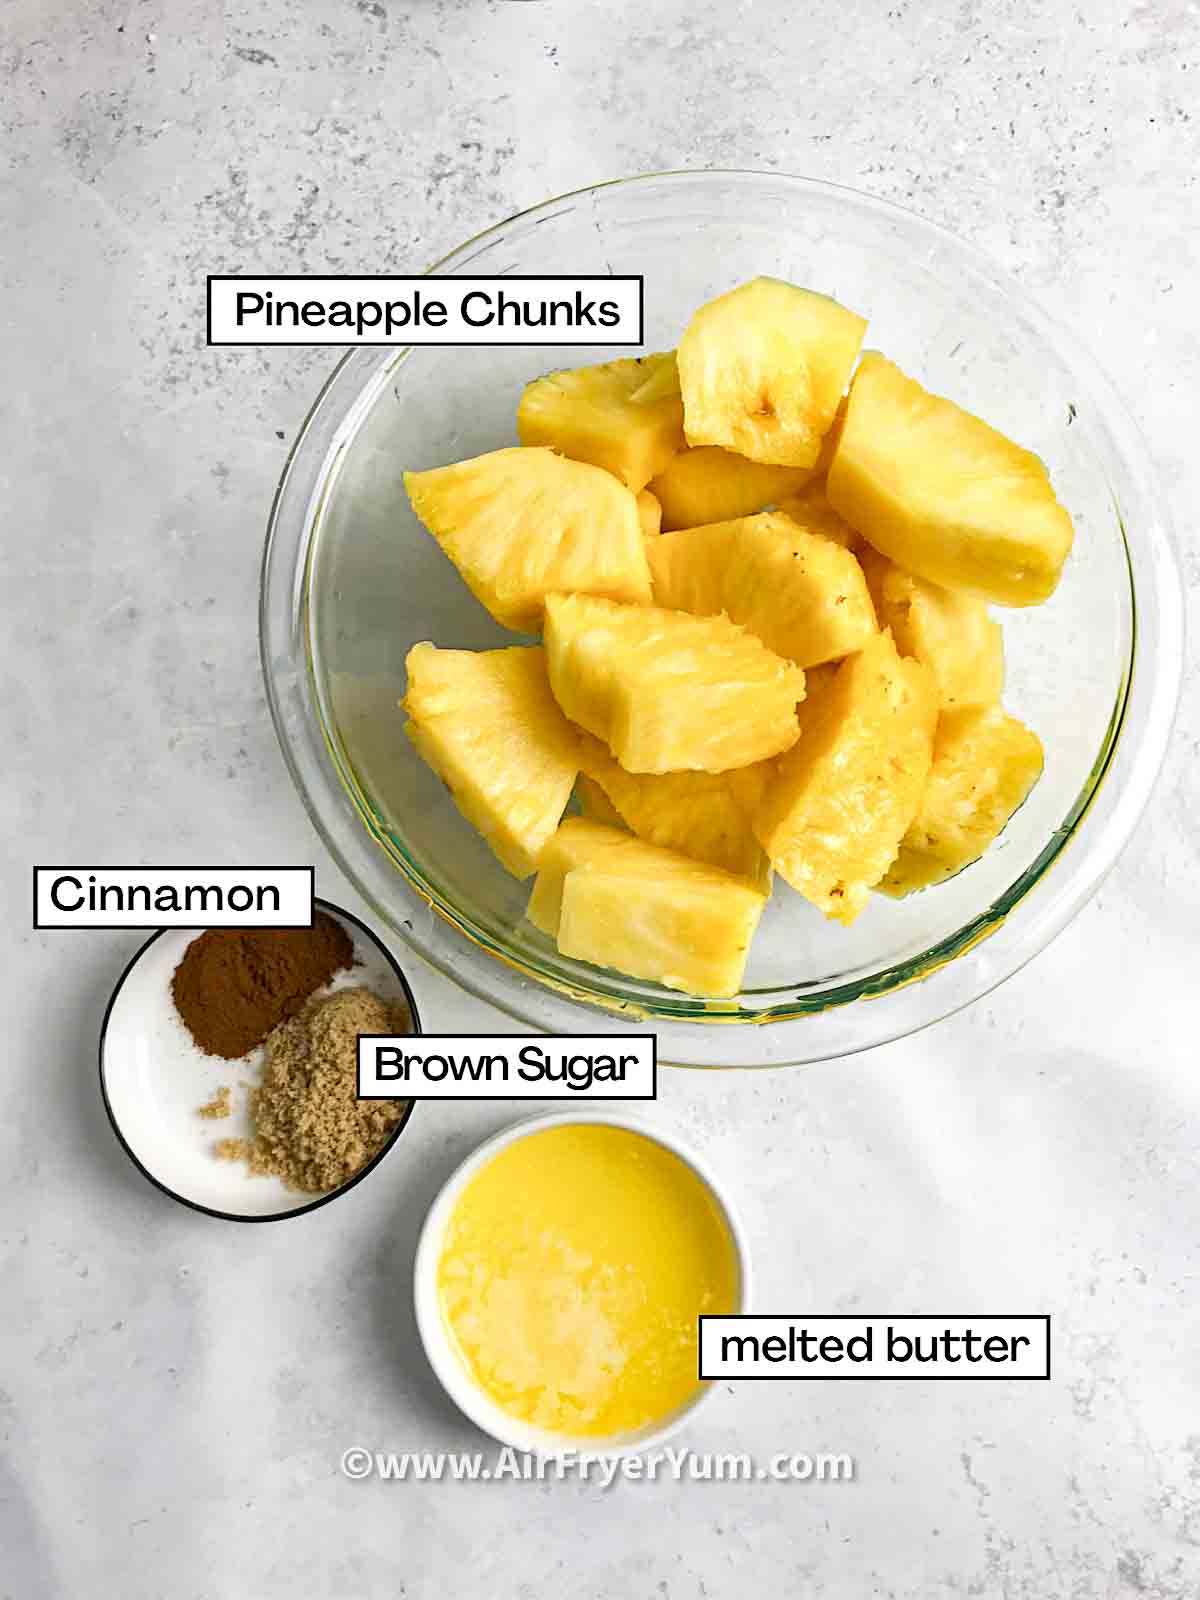 Image showing Ingredients which include a bowl
of pineapple chunks, a small bowl of melted butter and a small bowl of cinnamon and brown sugar 